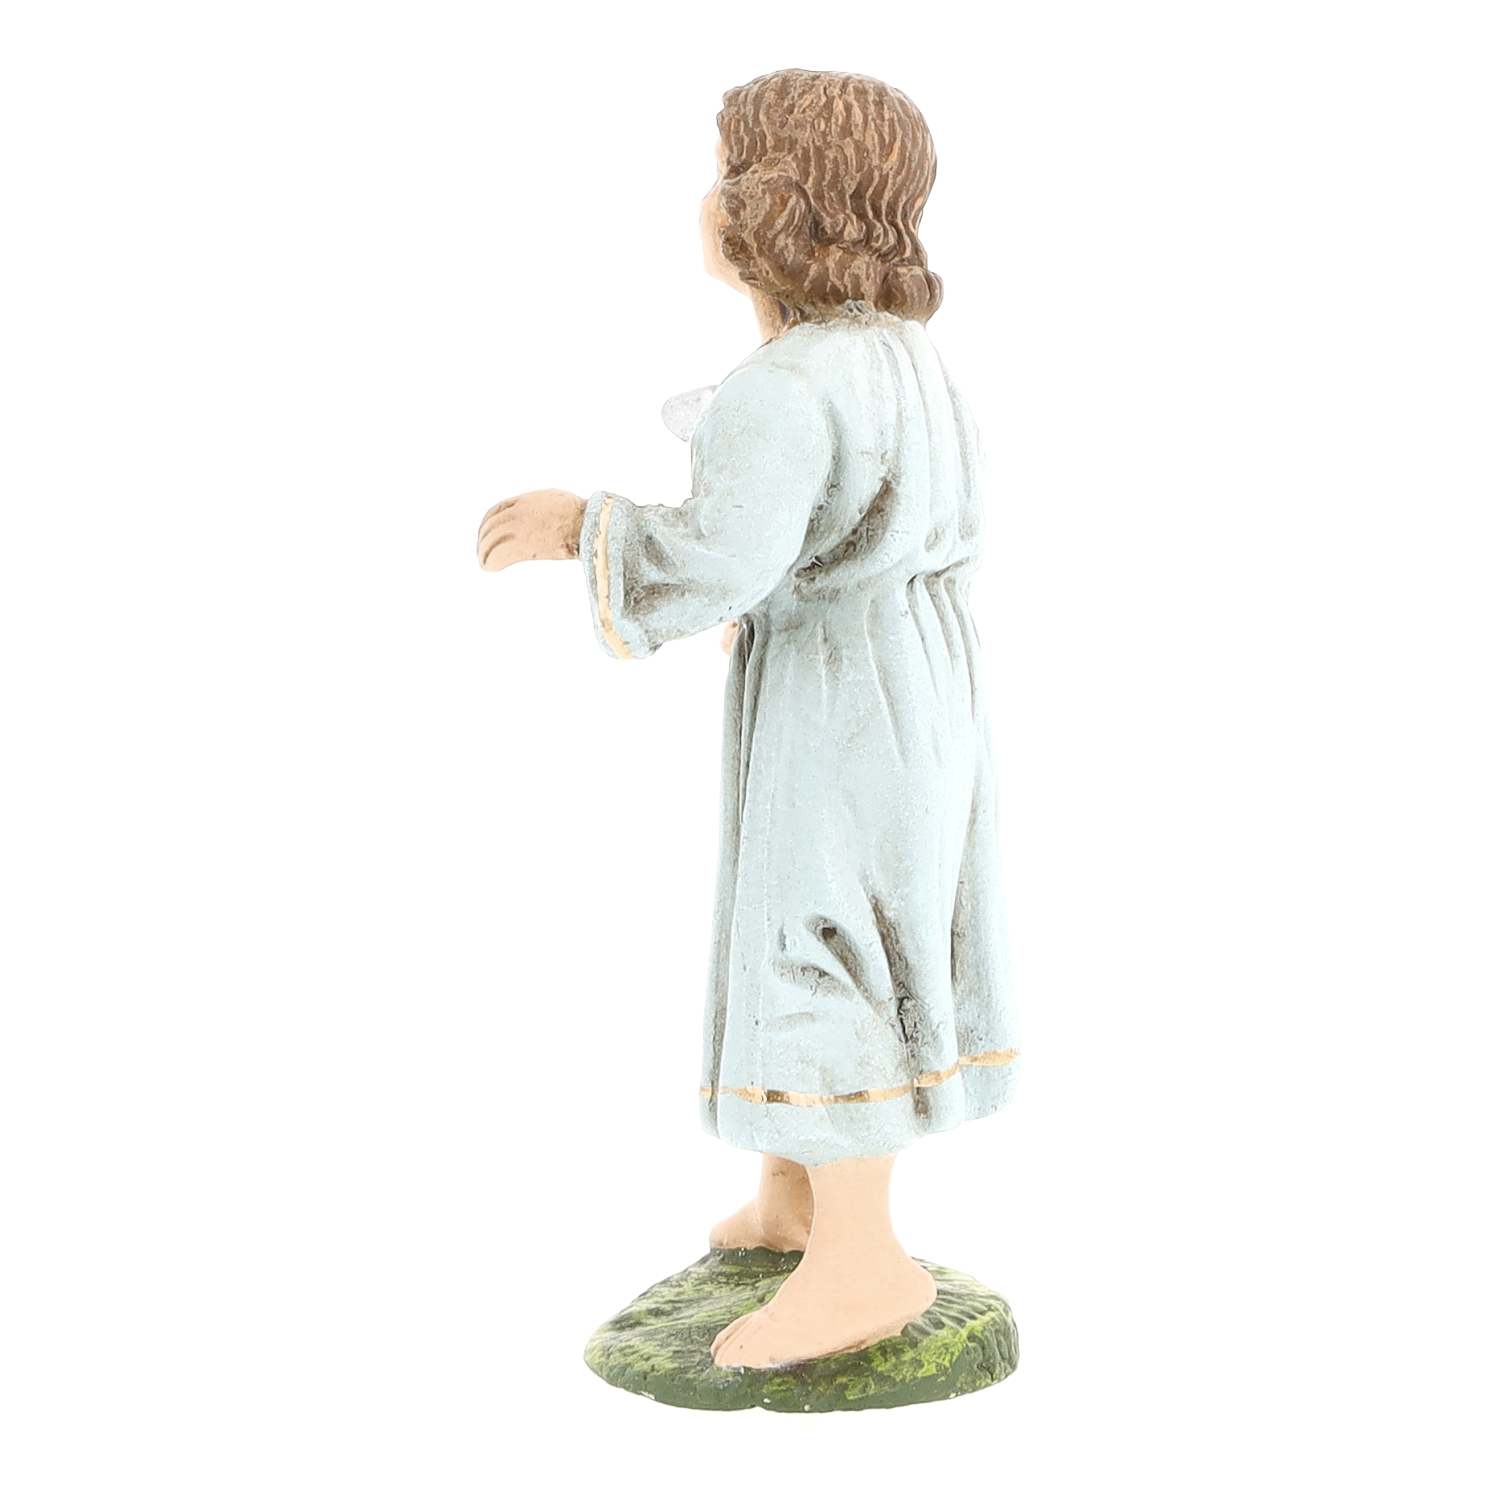 Holy Family at work, to 5.75 inch figure size